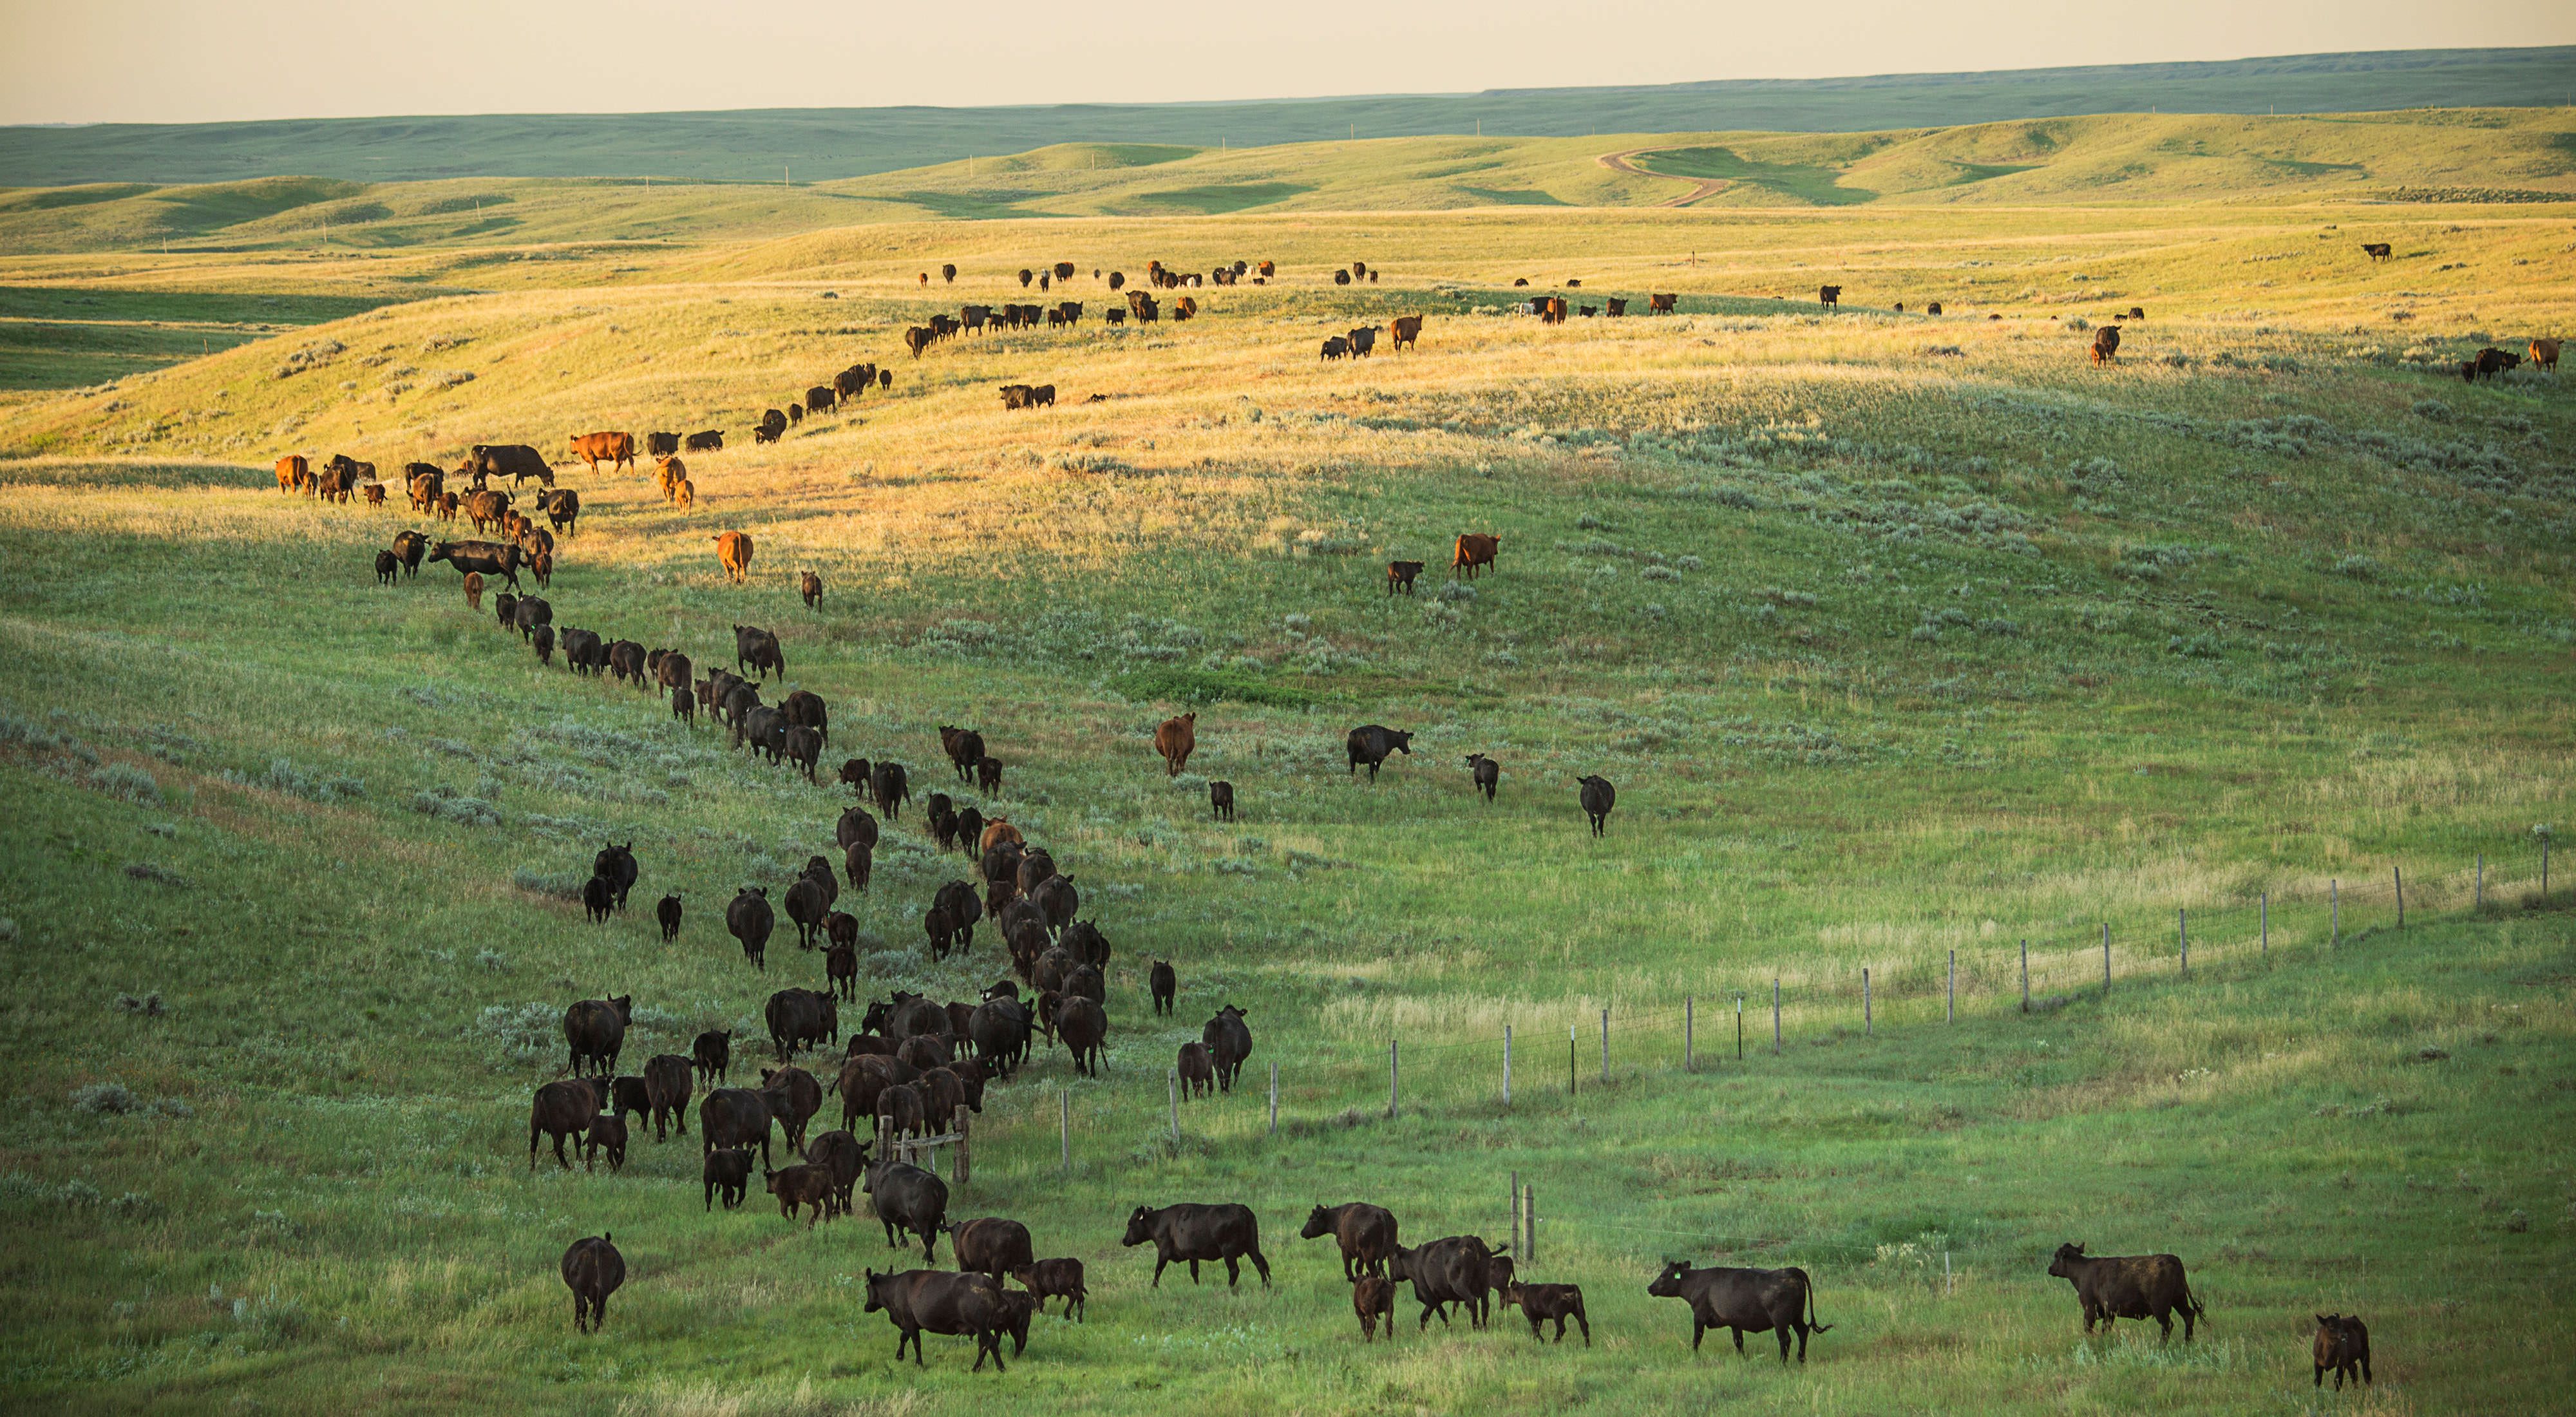 Brown and black cattle spread out in lines across rolling green hills.